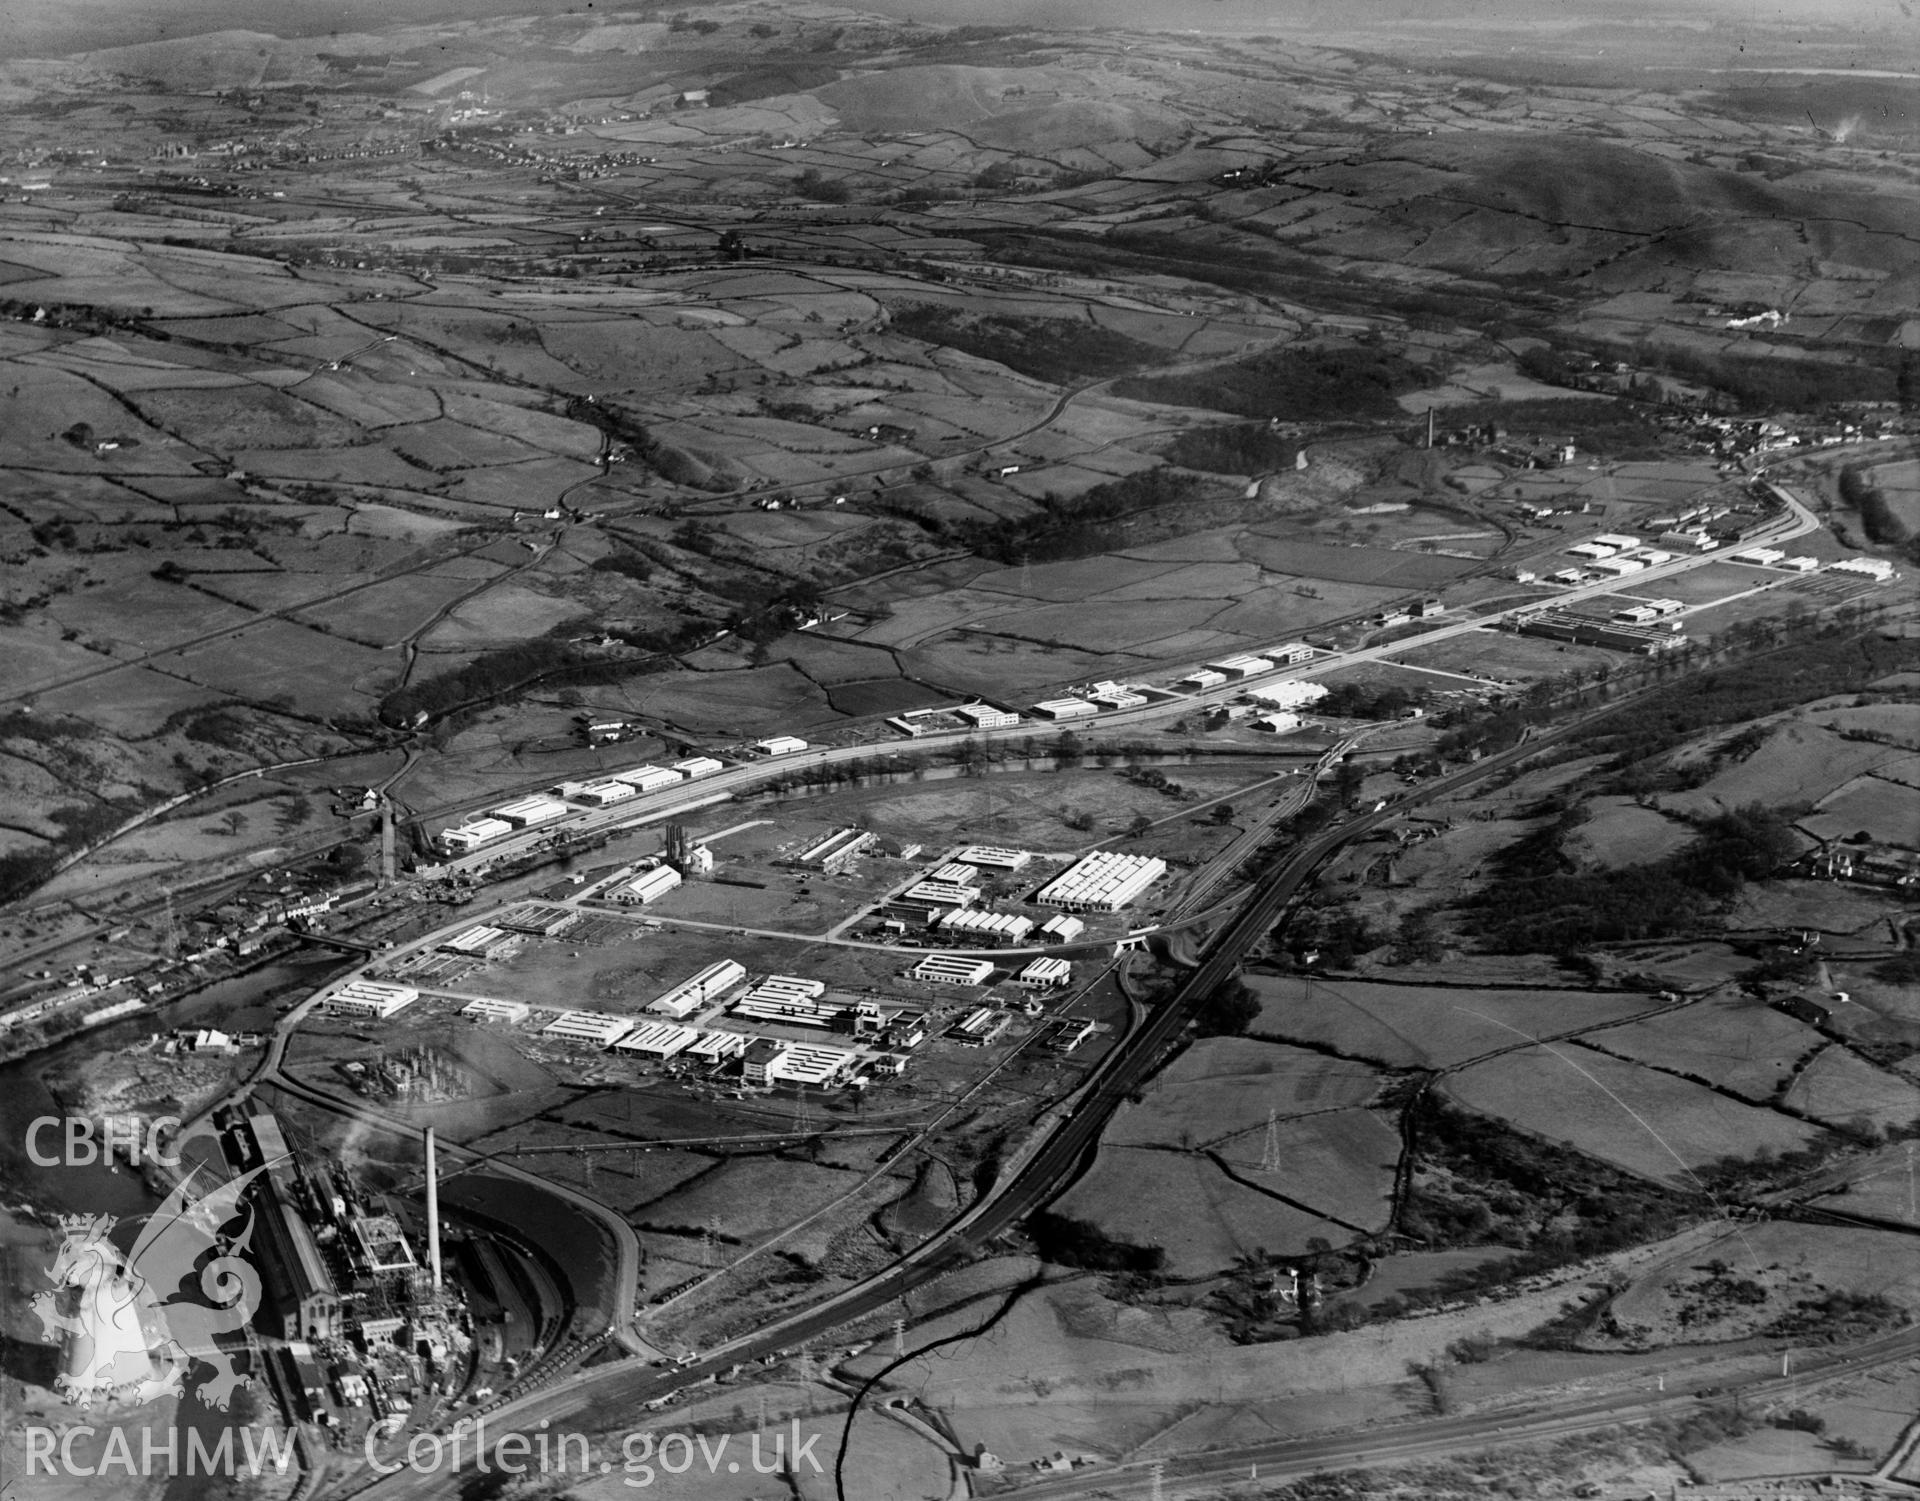 View of Pritchard, Wood & Partners, Treforest Trading Estate, oblique aerial view. 5?x4? black and white glass plate negative.